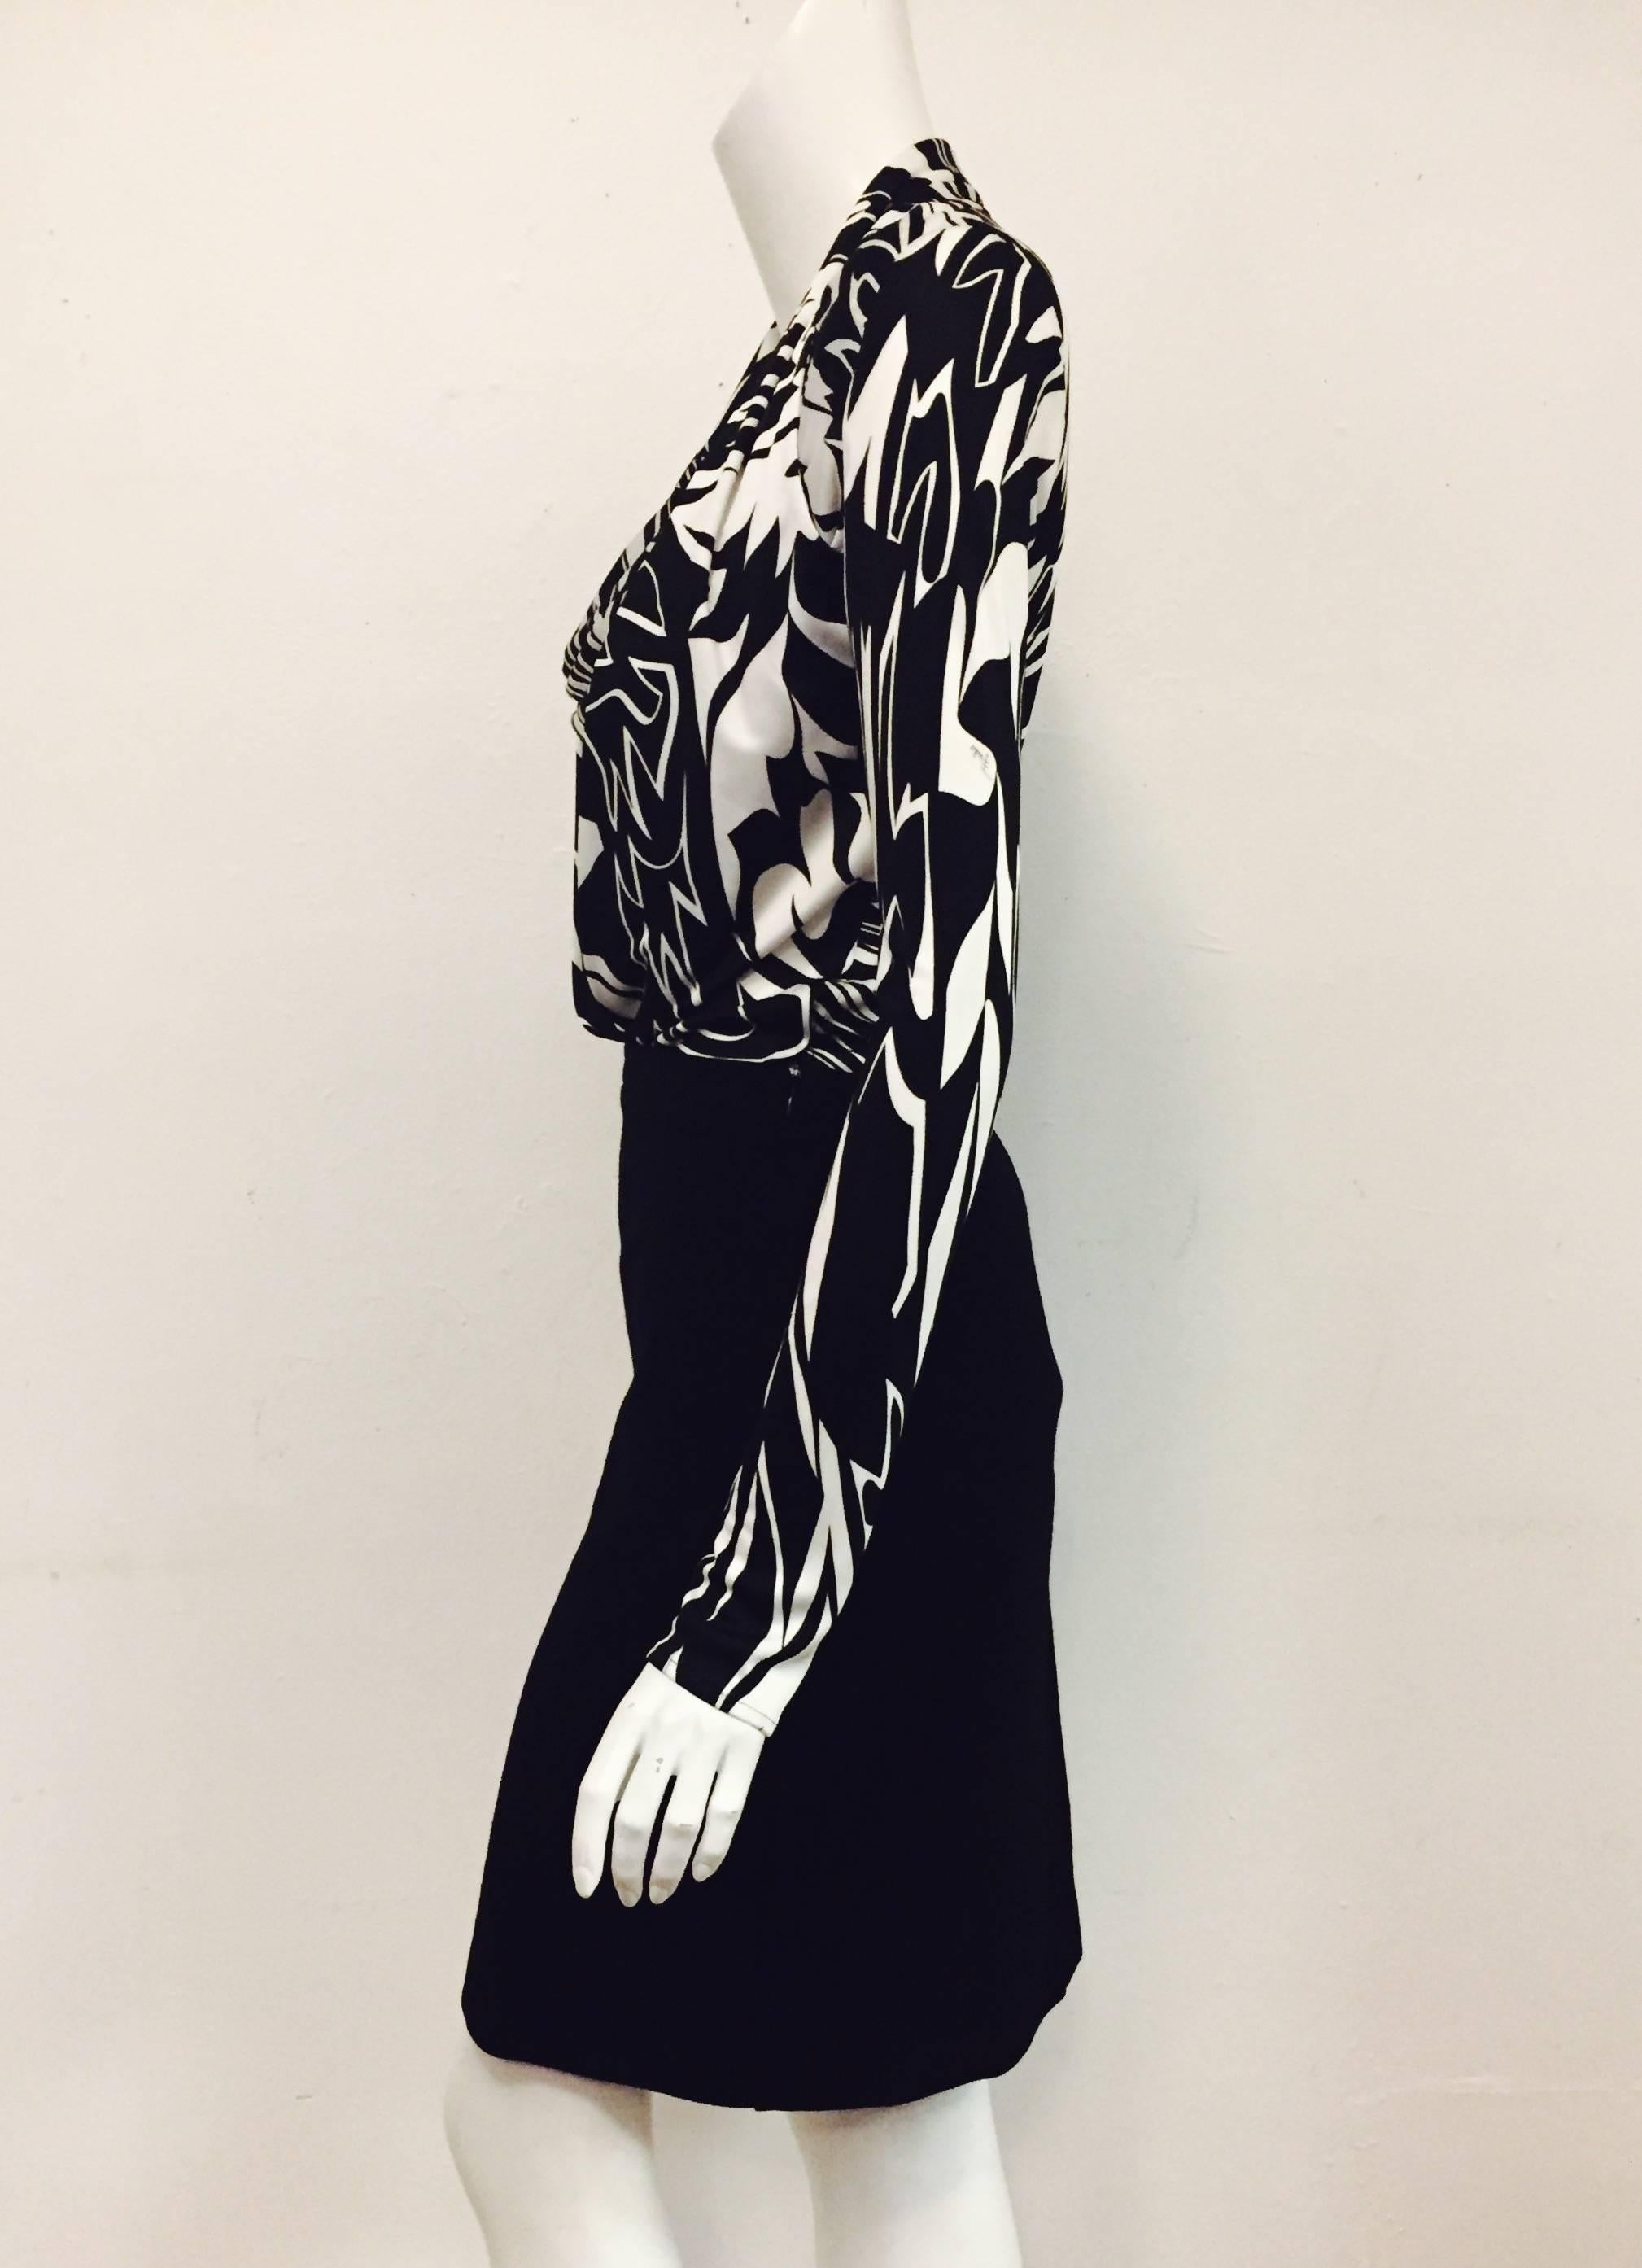 Elegant Emilio Pucci Black & White Long Sleeve Dress with Pencil Skirt In Excellent Condition For Sale In Palm Beach, FL